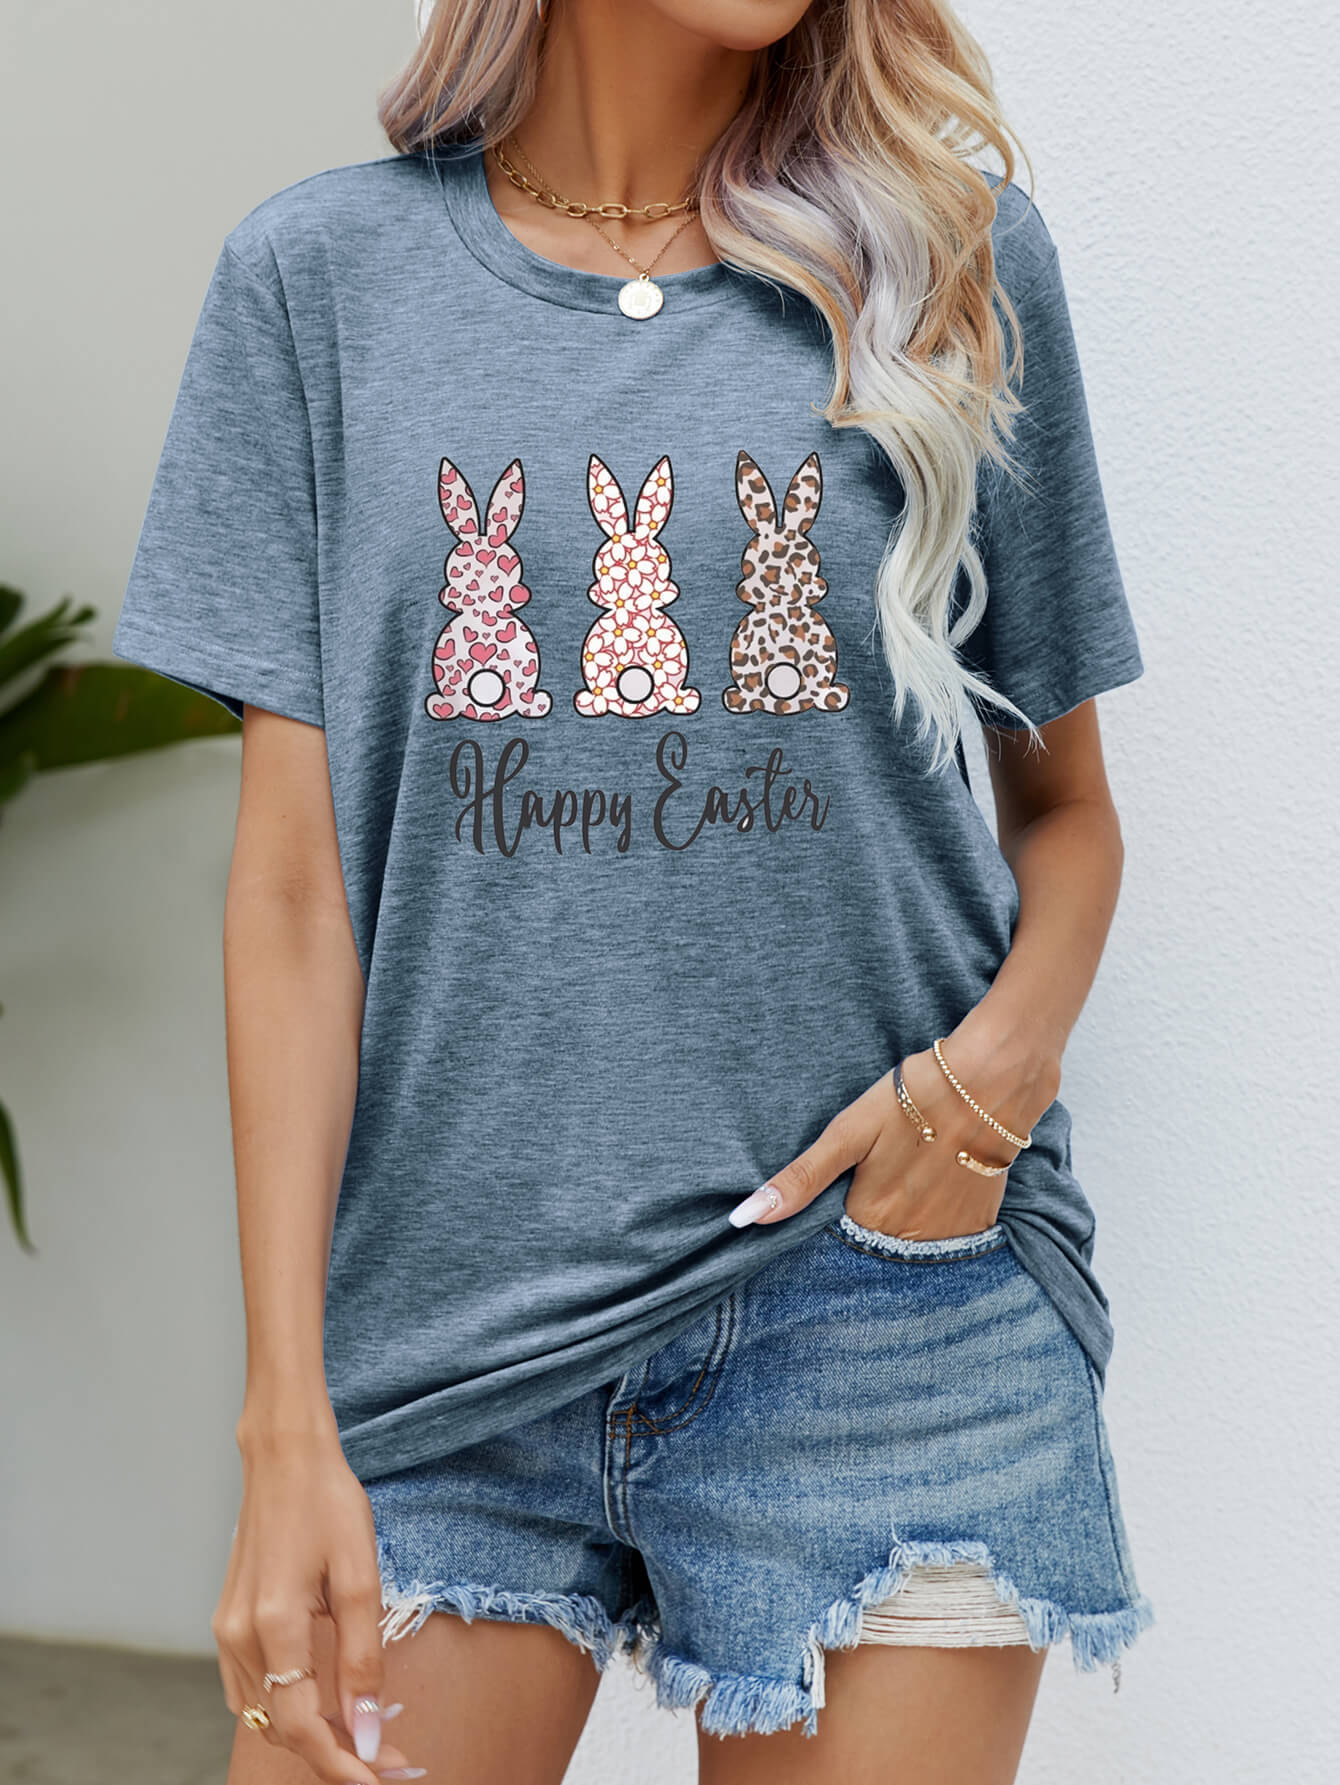 HAPPY EASTER Graphic Short Sleeve Tee - Light Blue / S - T-Shirts - Shirts & Tops - 19 - 2024